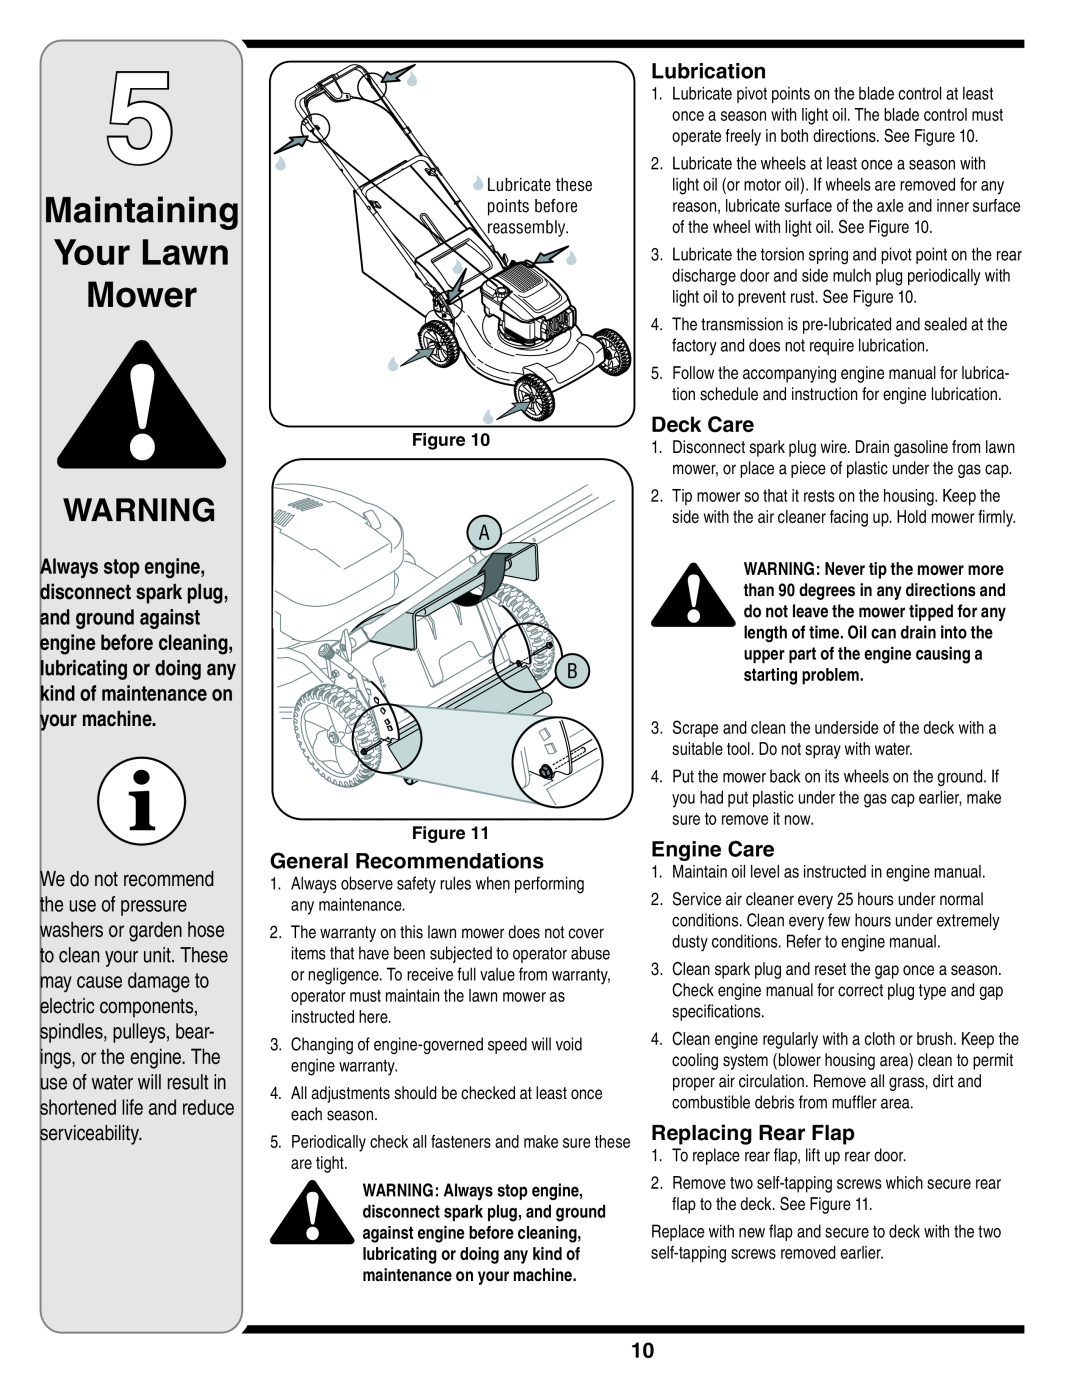 Yard-Man 829 warranty Maintaining Your Lawn Mower, General Recommendations, Lubrication, Deck Care, Engine Care 